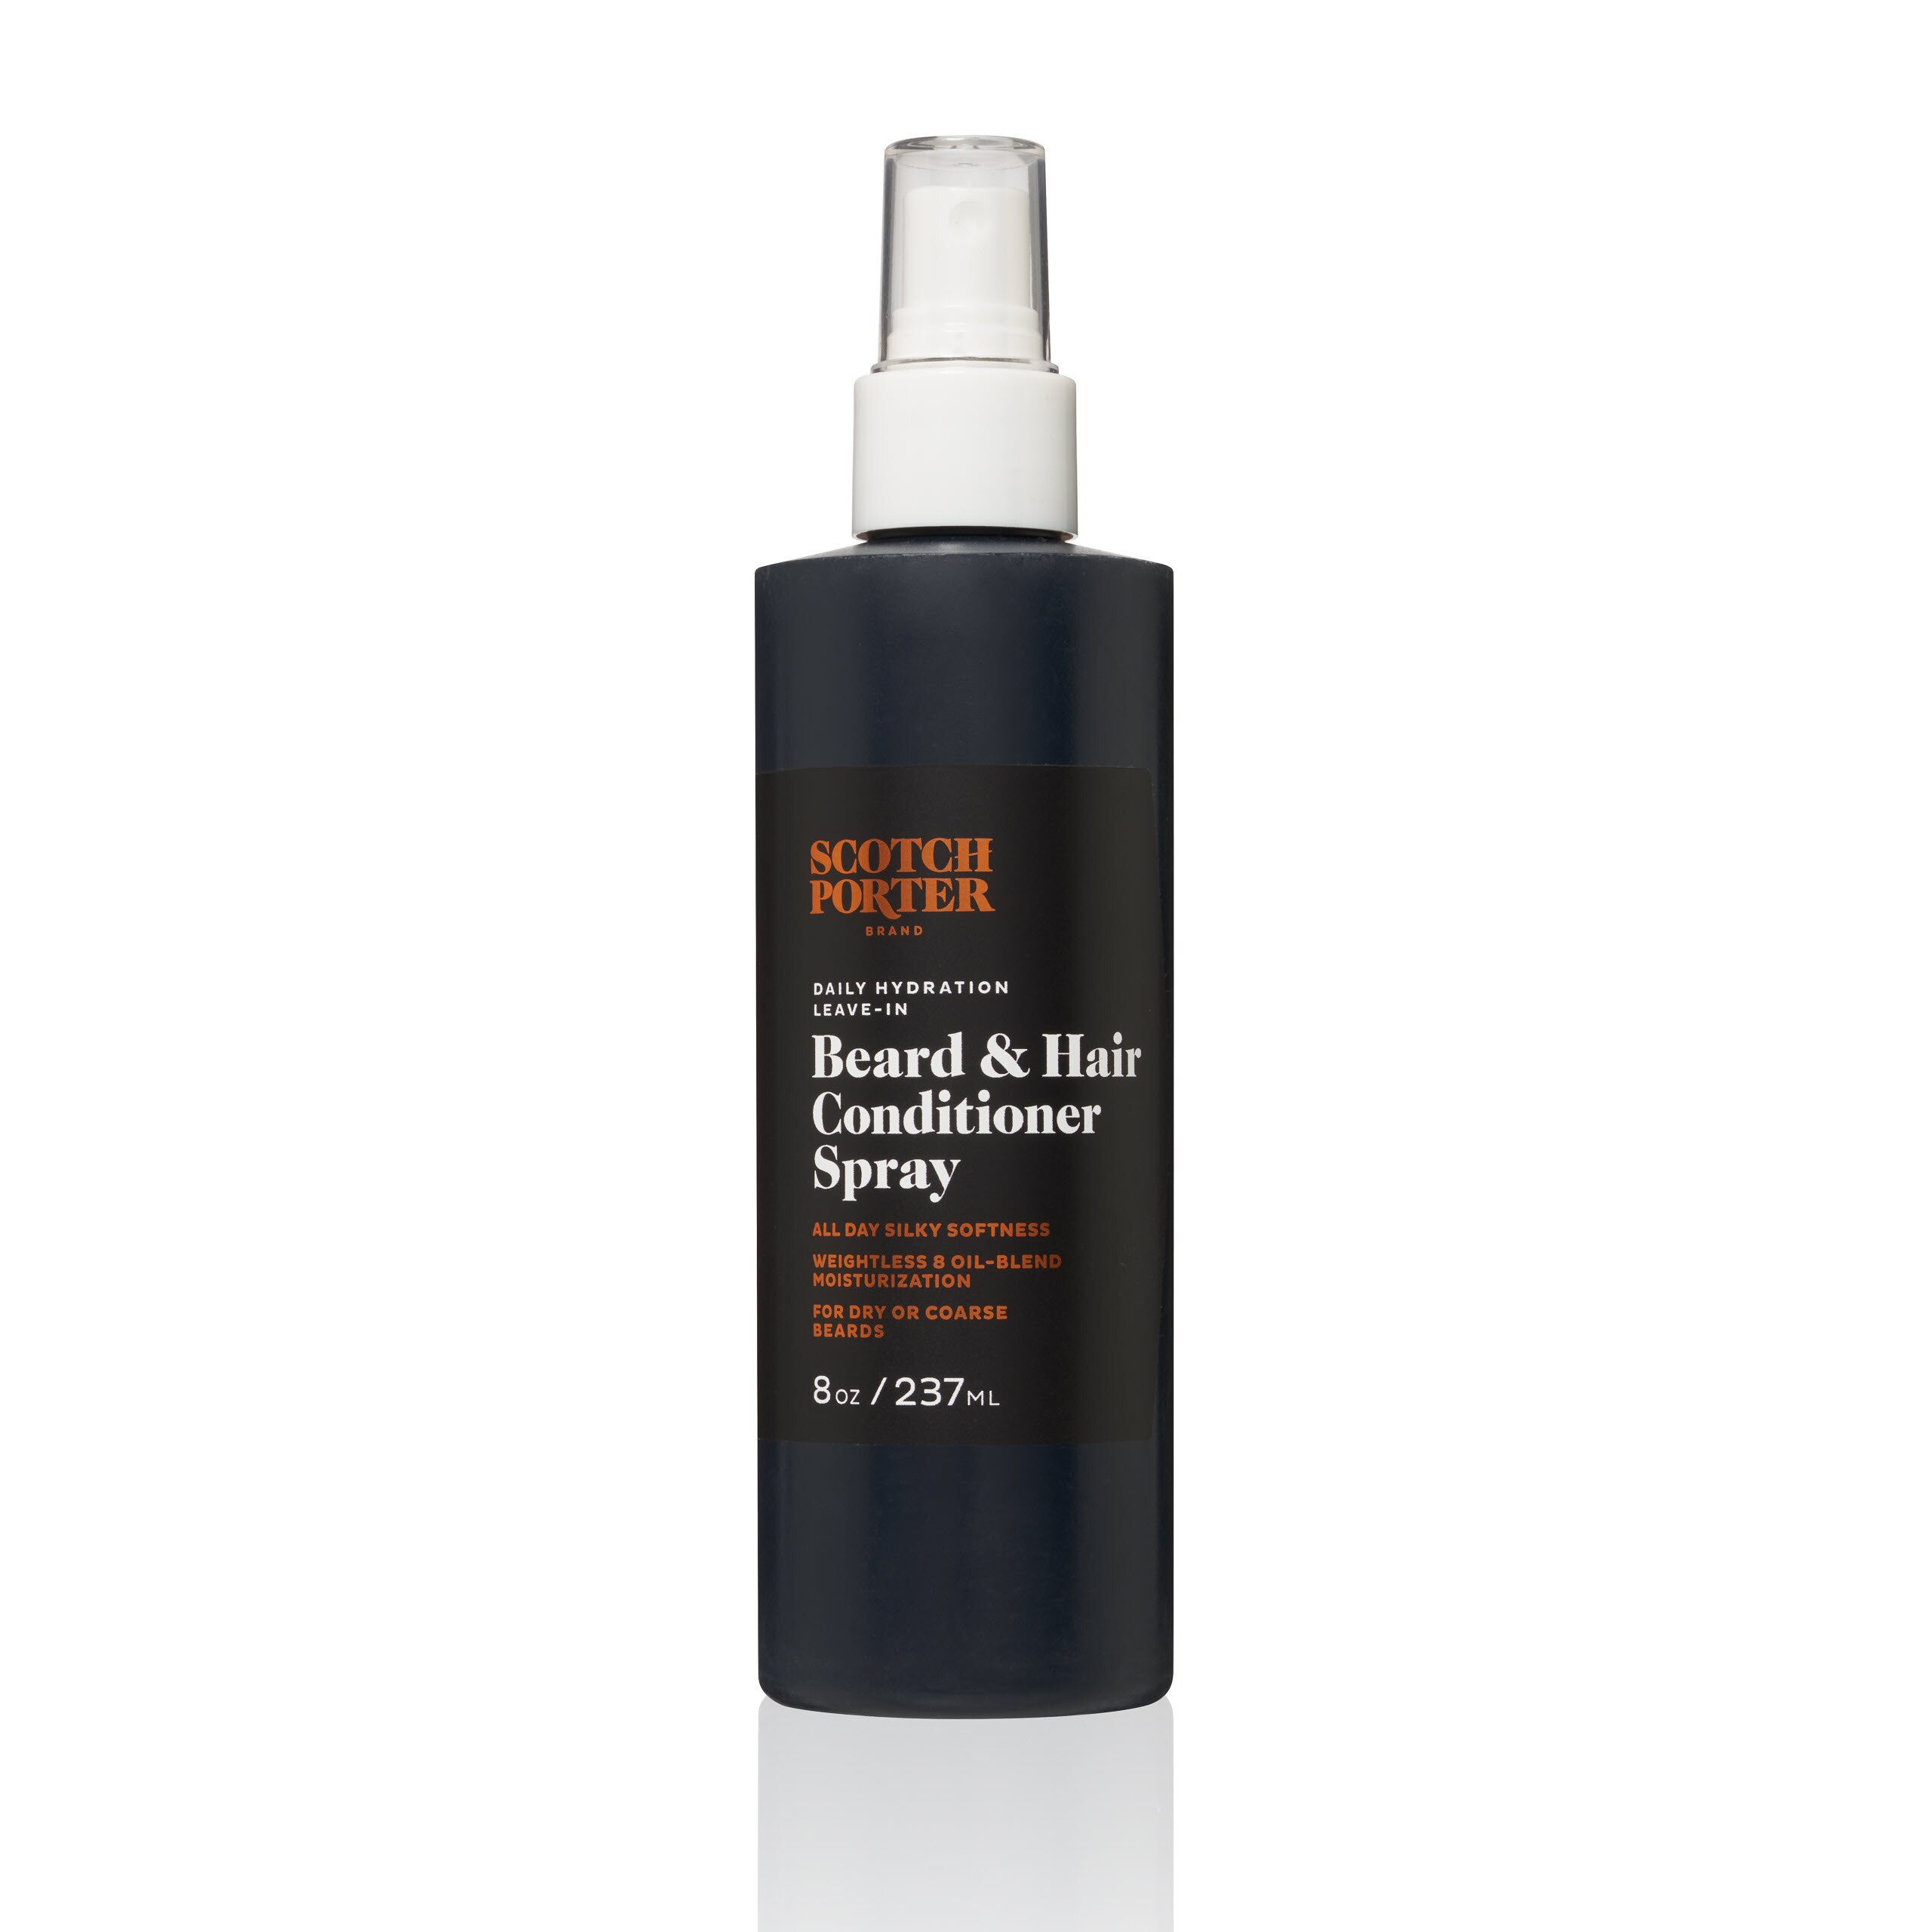 Scotch Porter Daily Leave-In Conditioner Beard & Hair Spray, 8 OZ